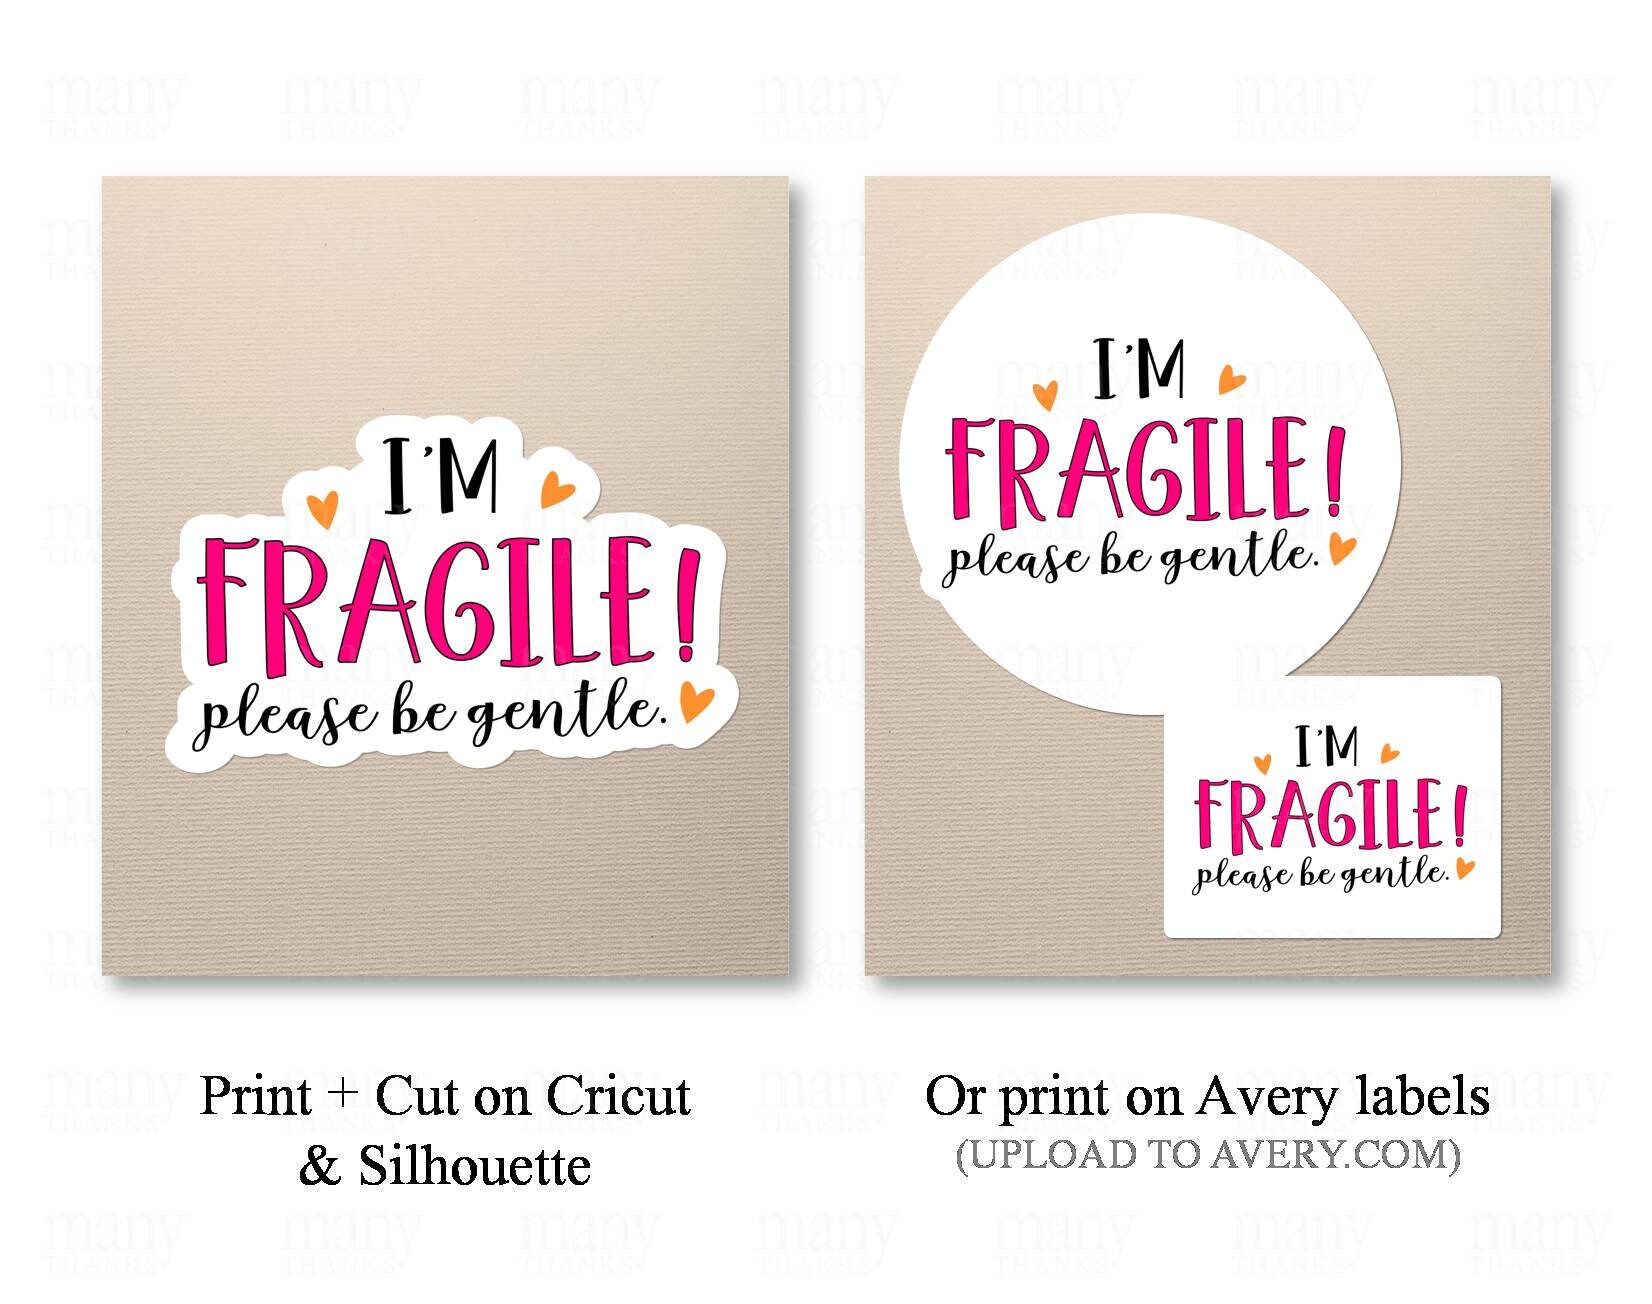 Fragile Stickers - Small Business Graphic by stacysdigitaldesigns